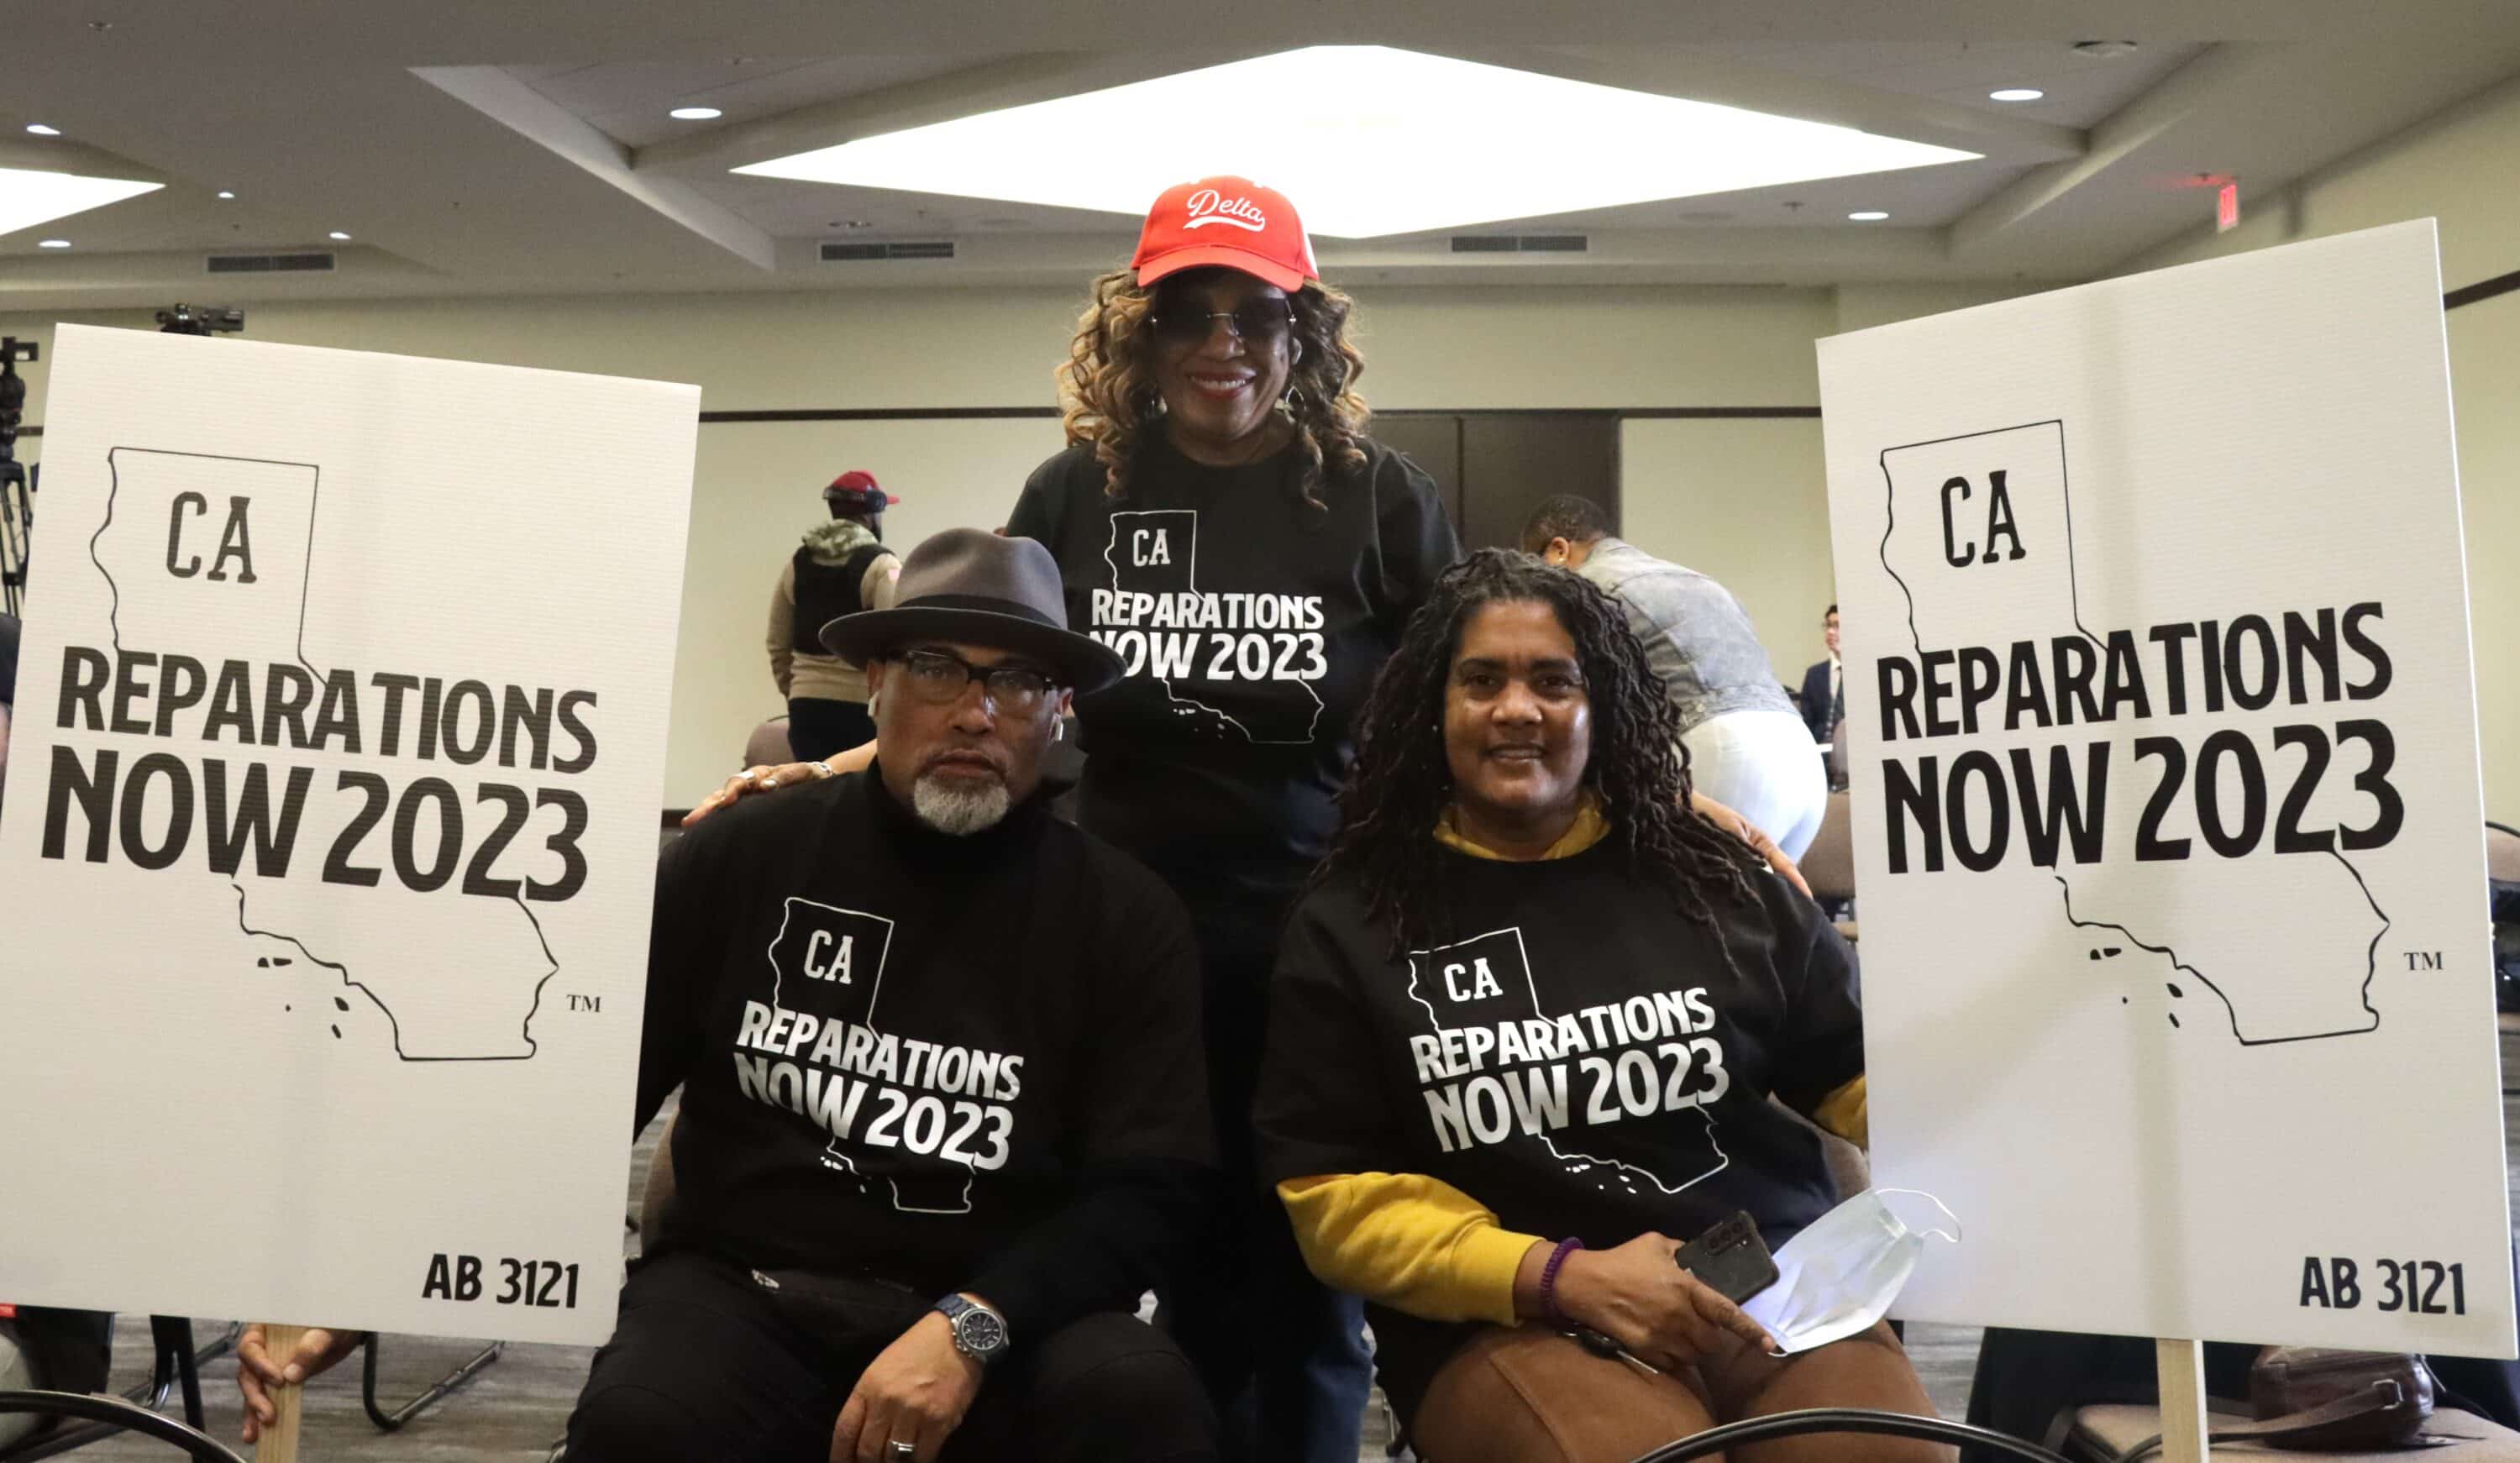 California reparations task force meets in San Diego to discuss